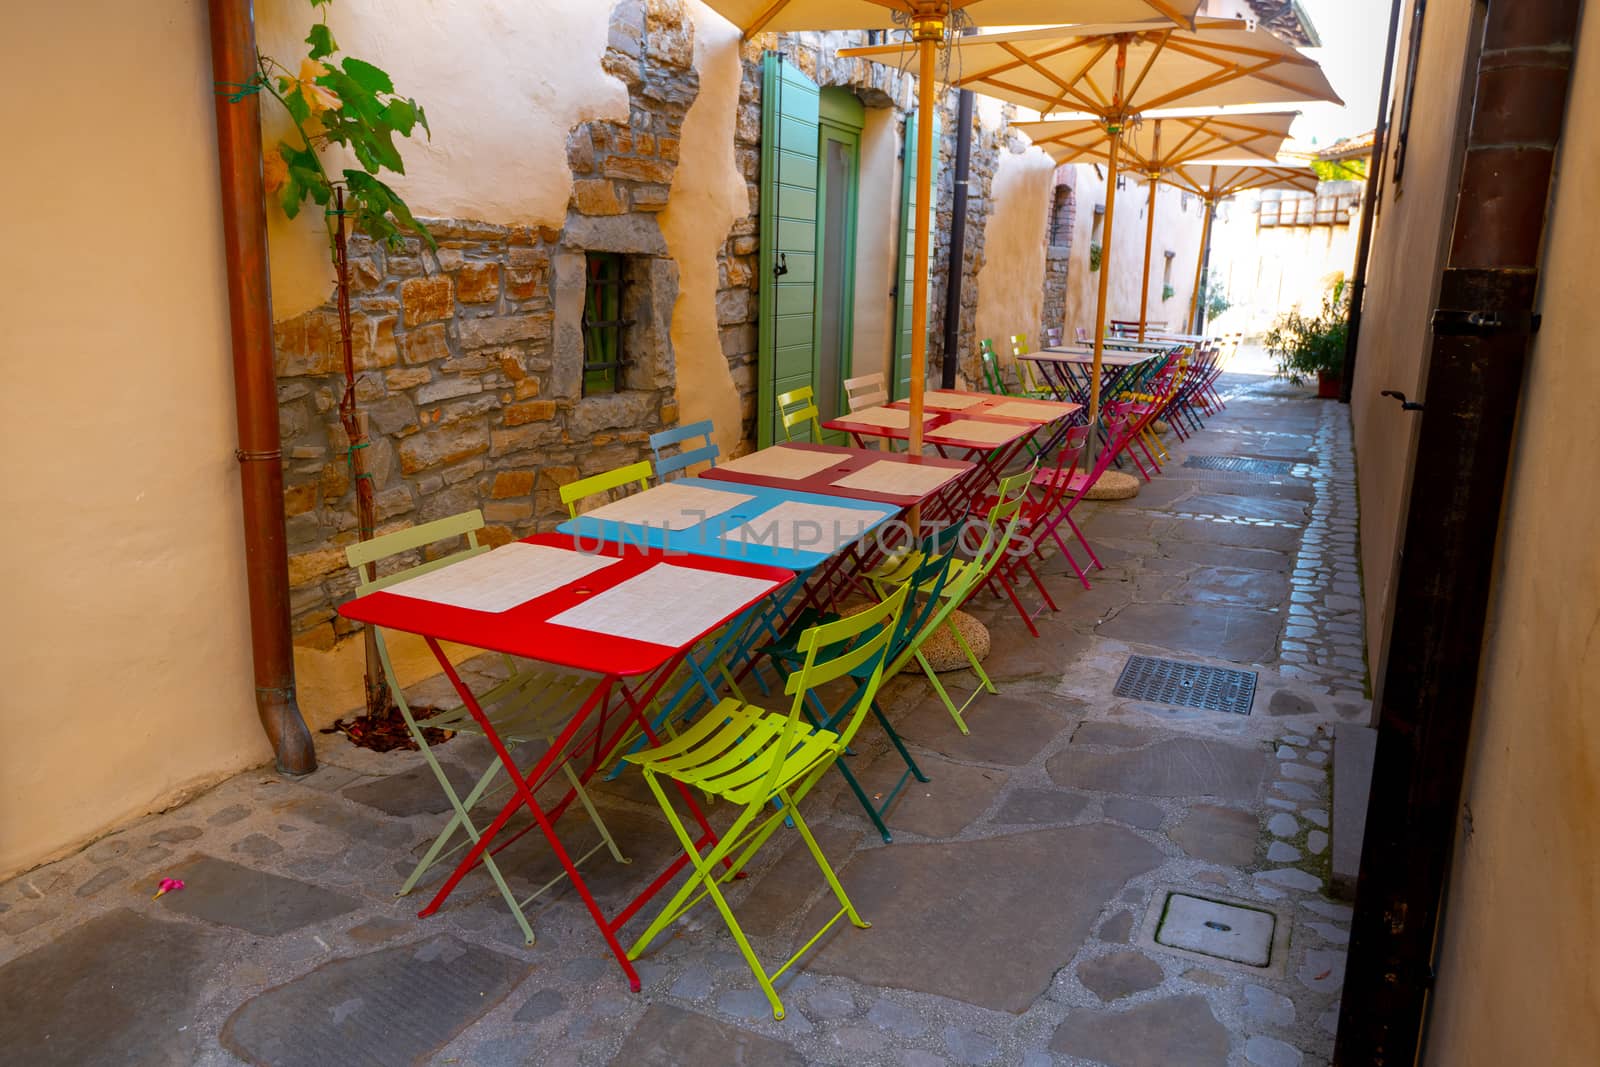 Small caffee, restaurant in narrow street in a medieval town with colorful tables and chairs by asafaric